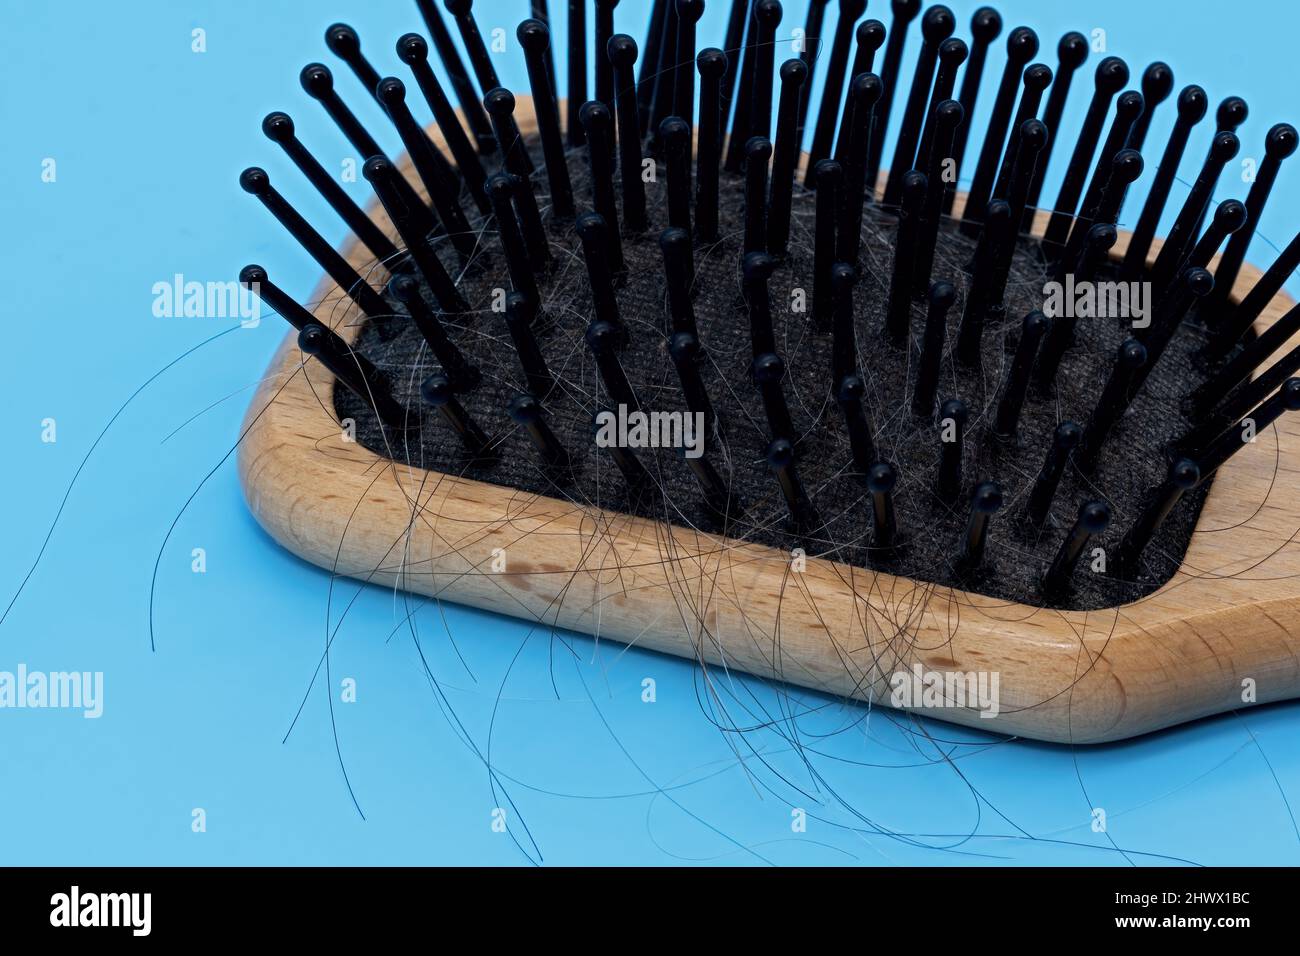 Wooden hairbrush with plastic tines and fallen  black and gray hair Stock Photo